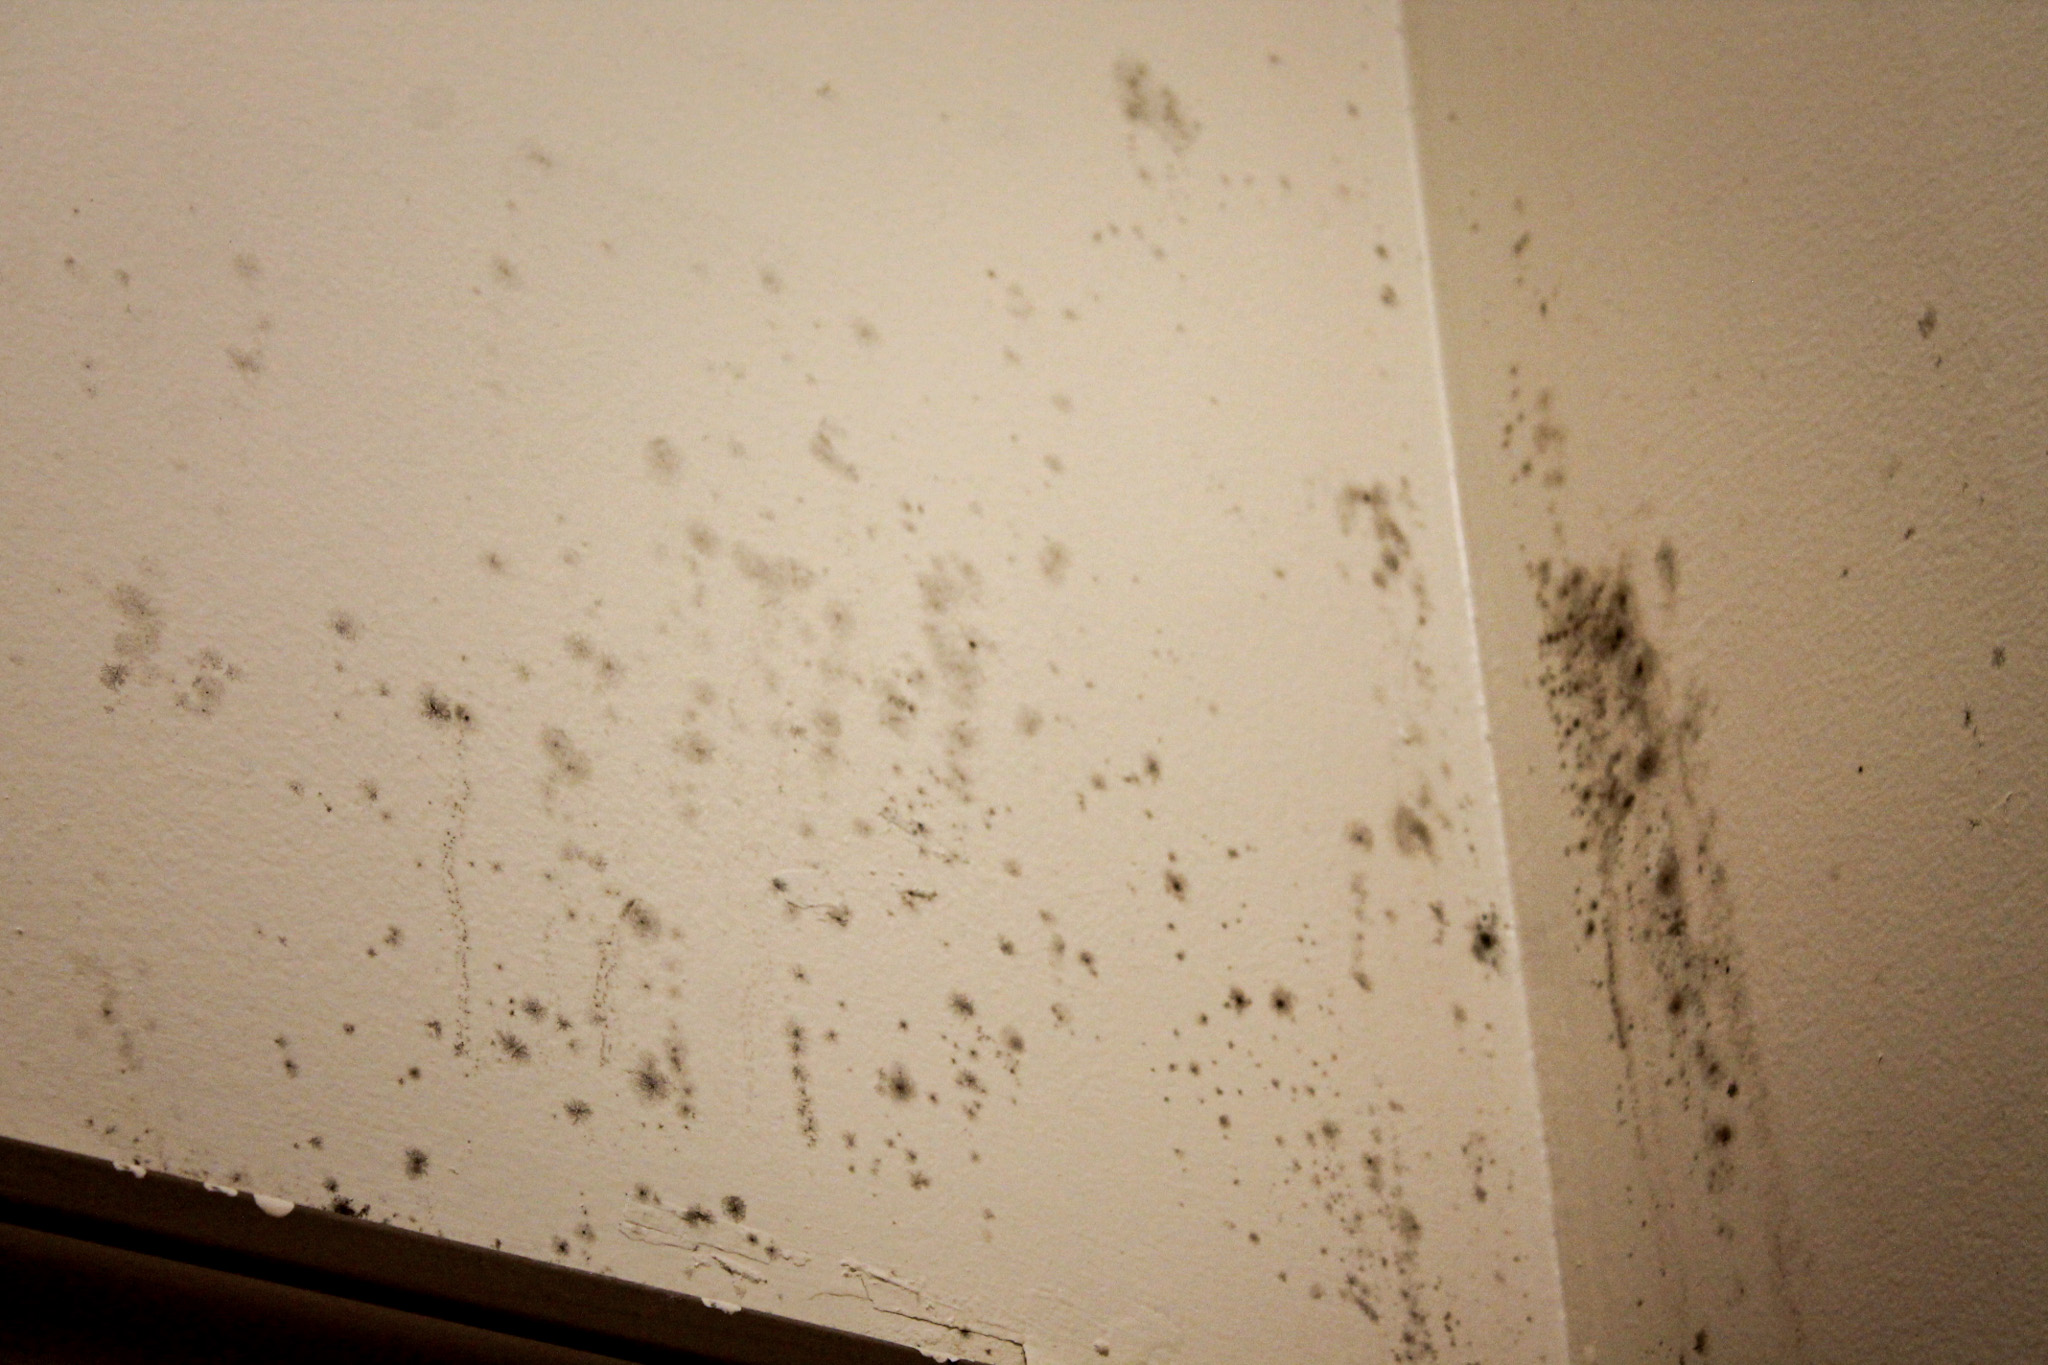 Students+complain+of+mold+on-campus